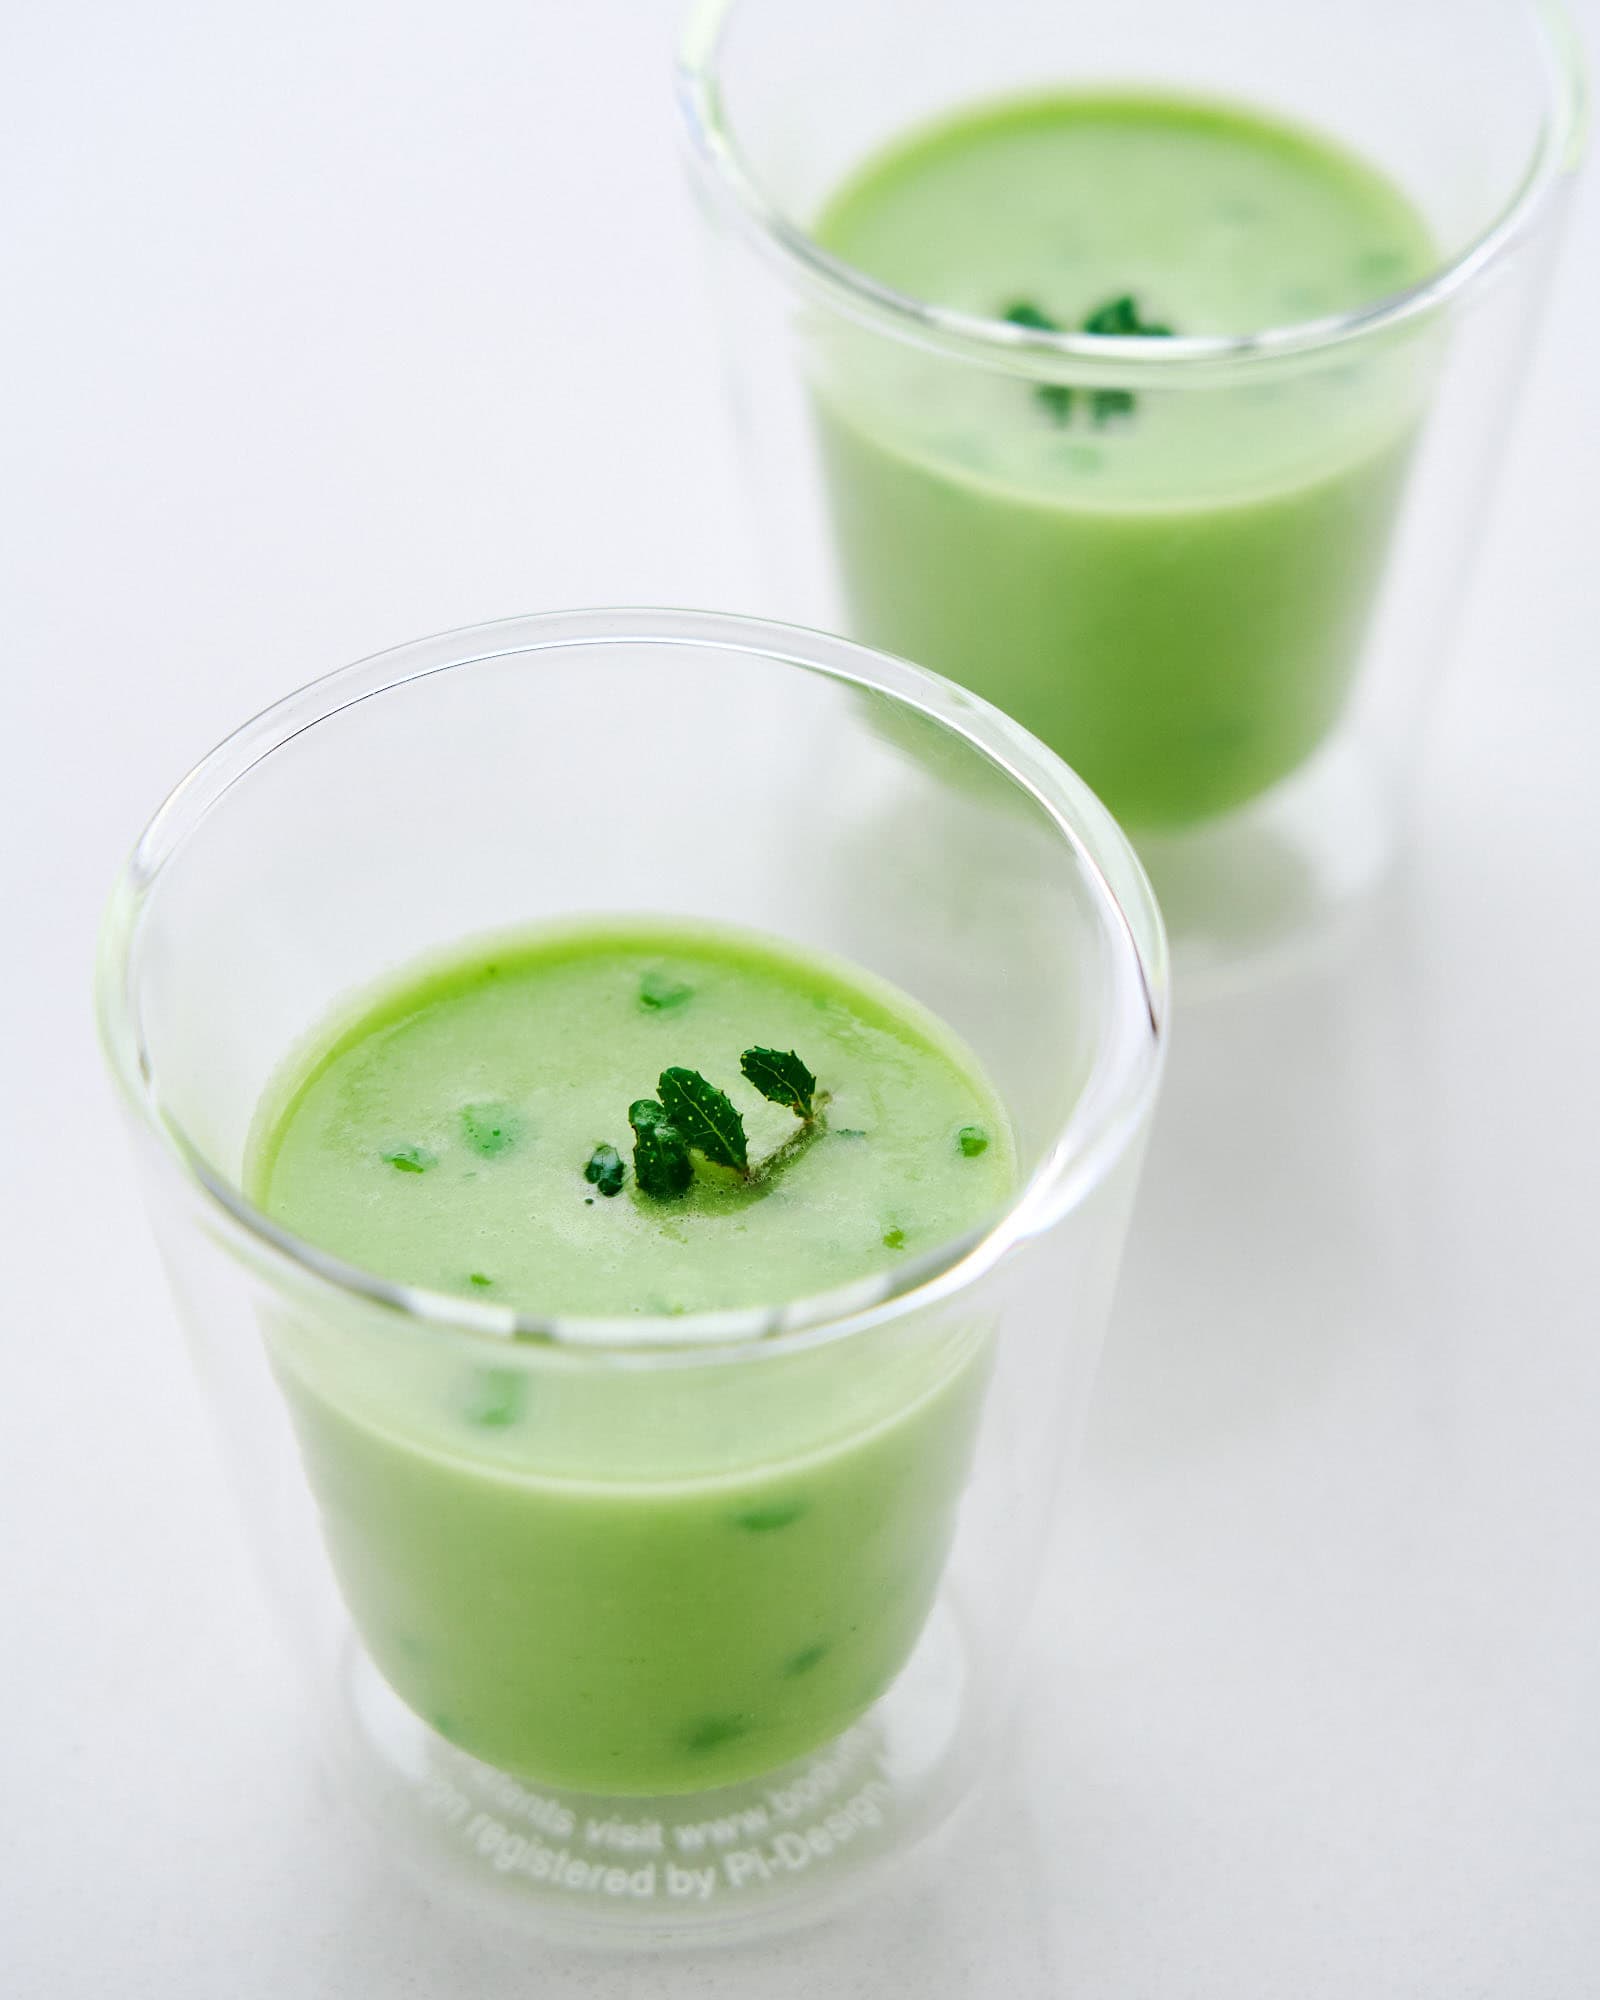 Cool green soup of fresh snap peas.